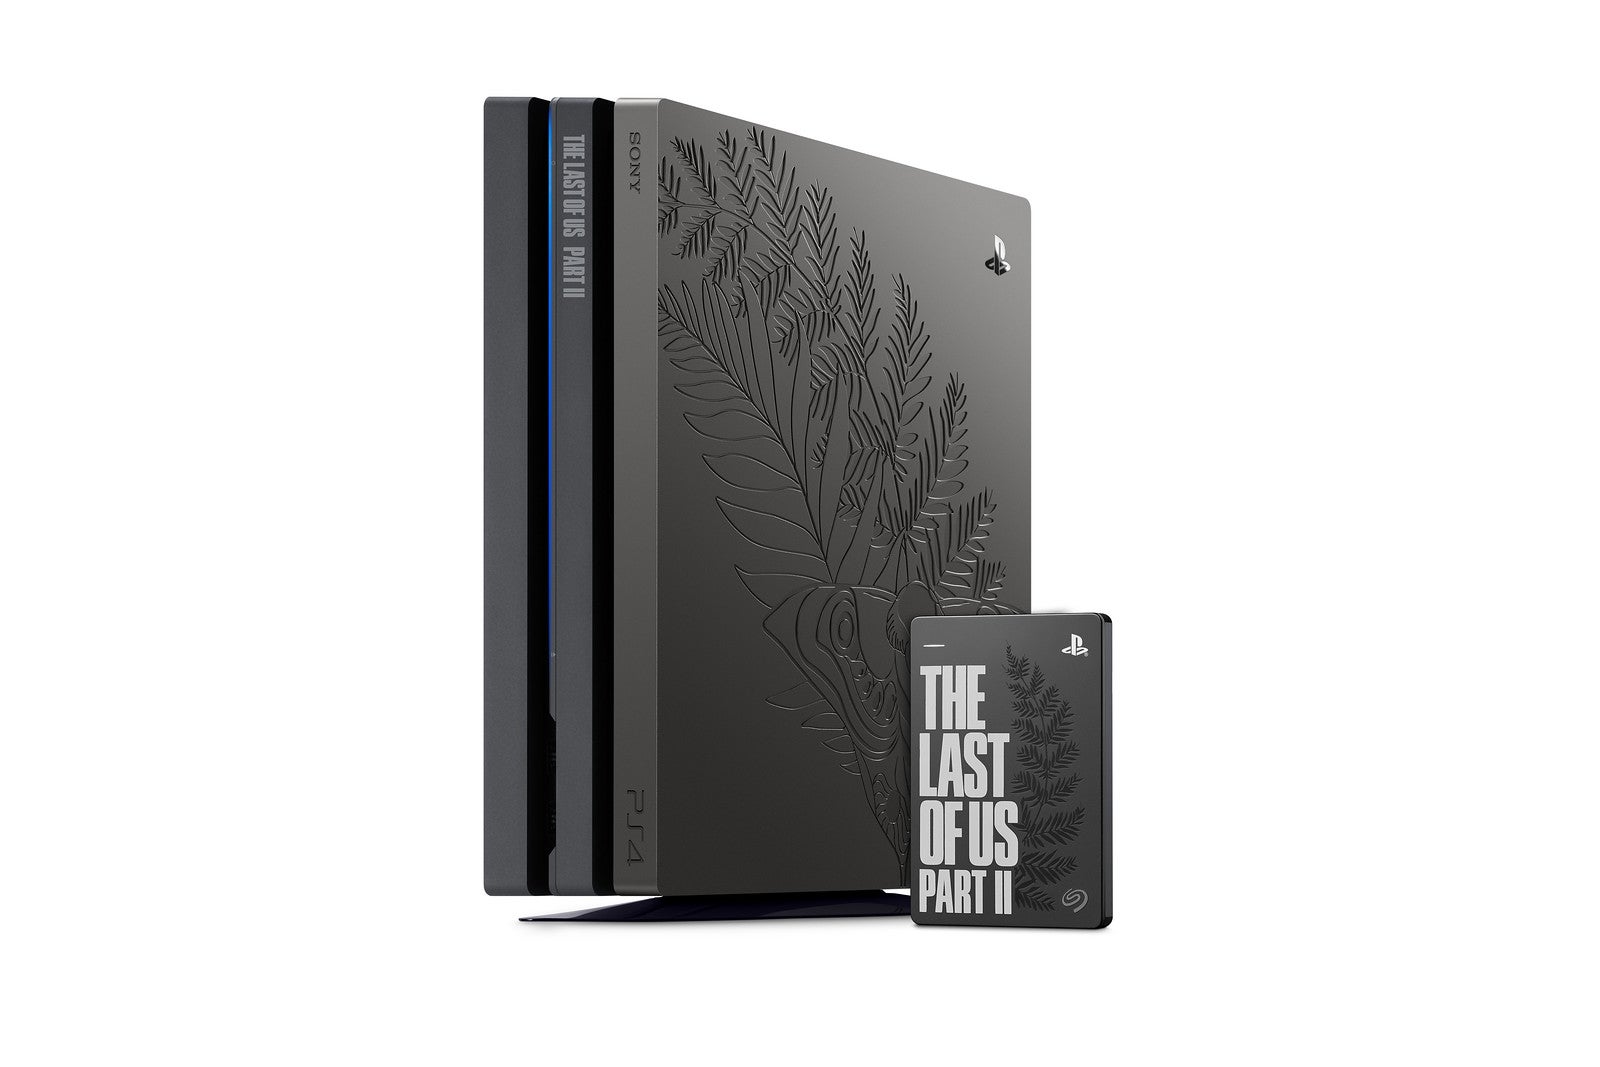 Limited Edition The Last of Us: Part 2 PS4 Pro bundle announced